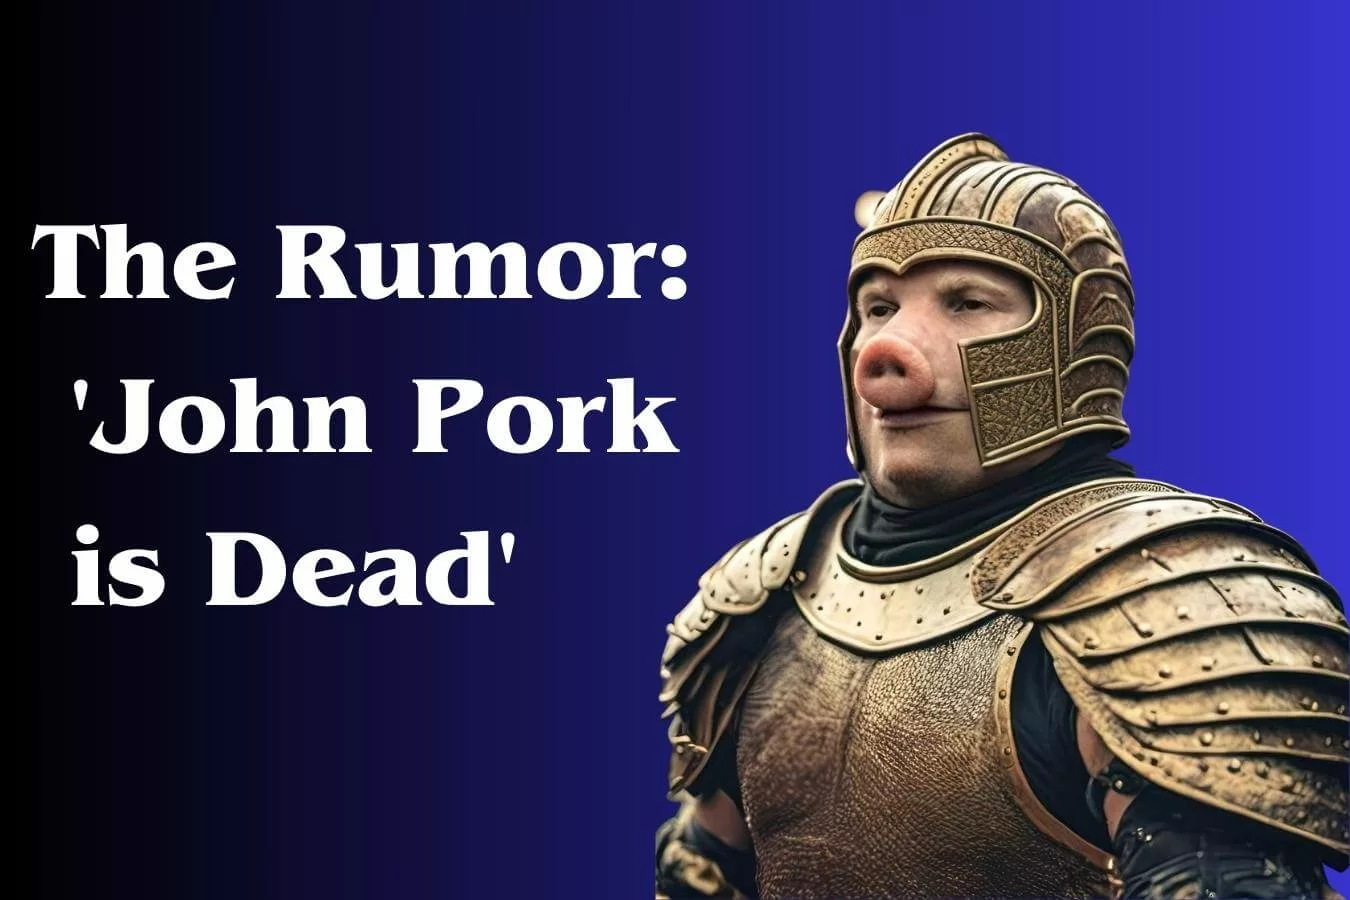 The Rumor about death of john